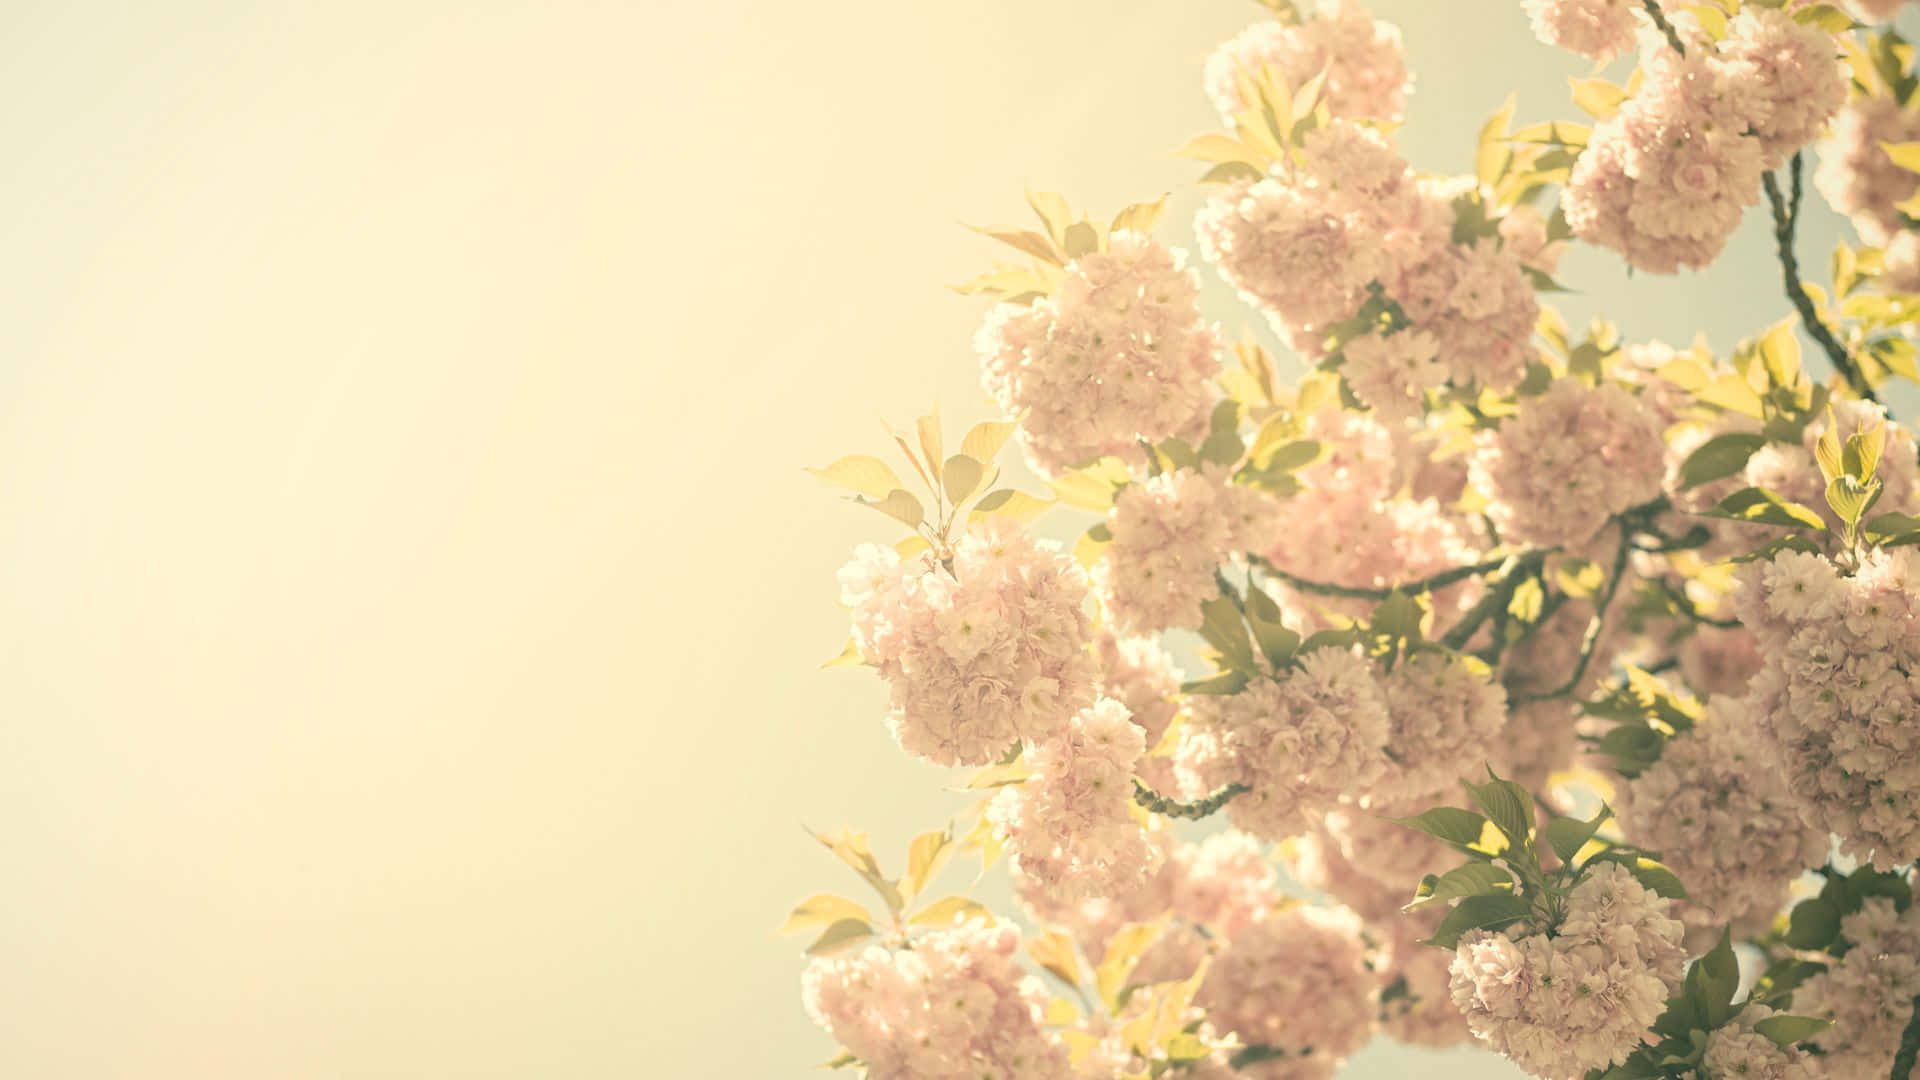 A vintage flower background with old-fashioned tones and colors